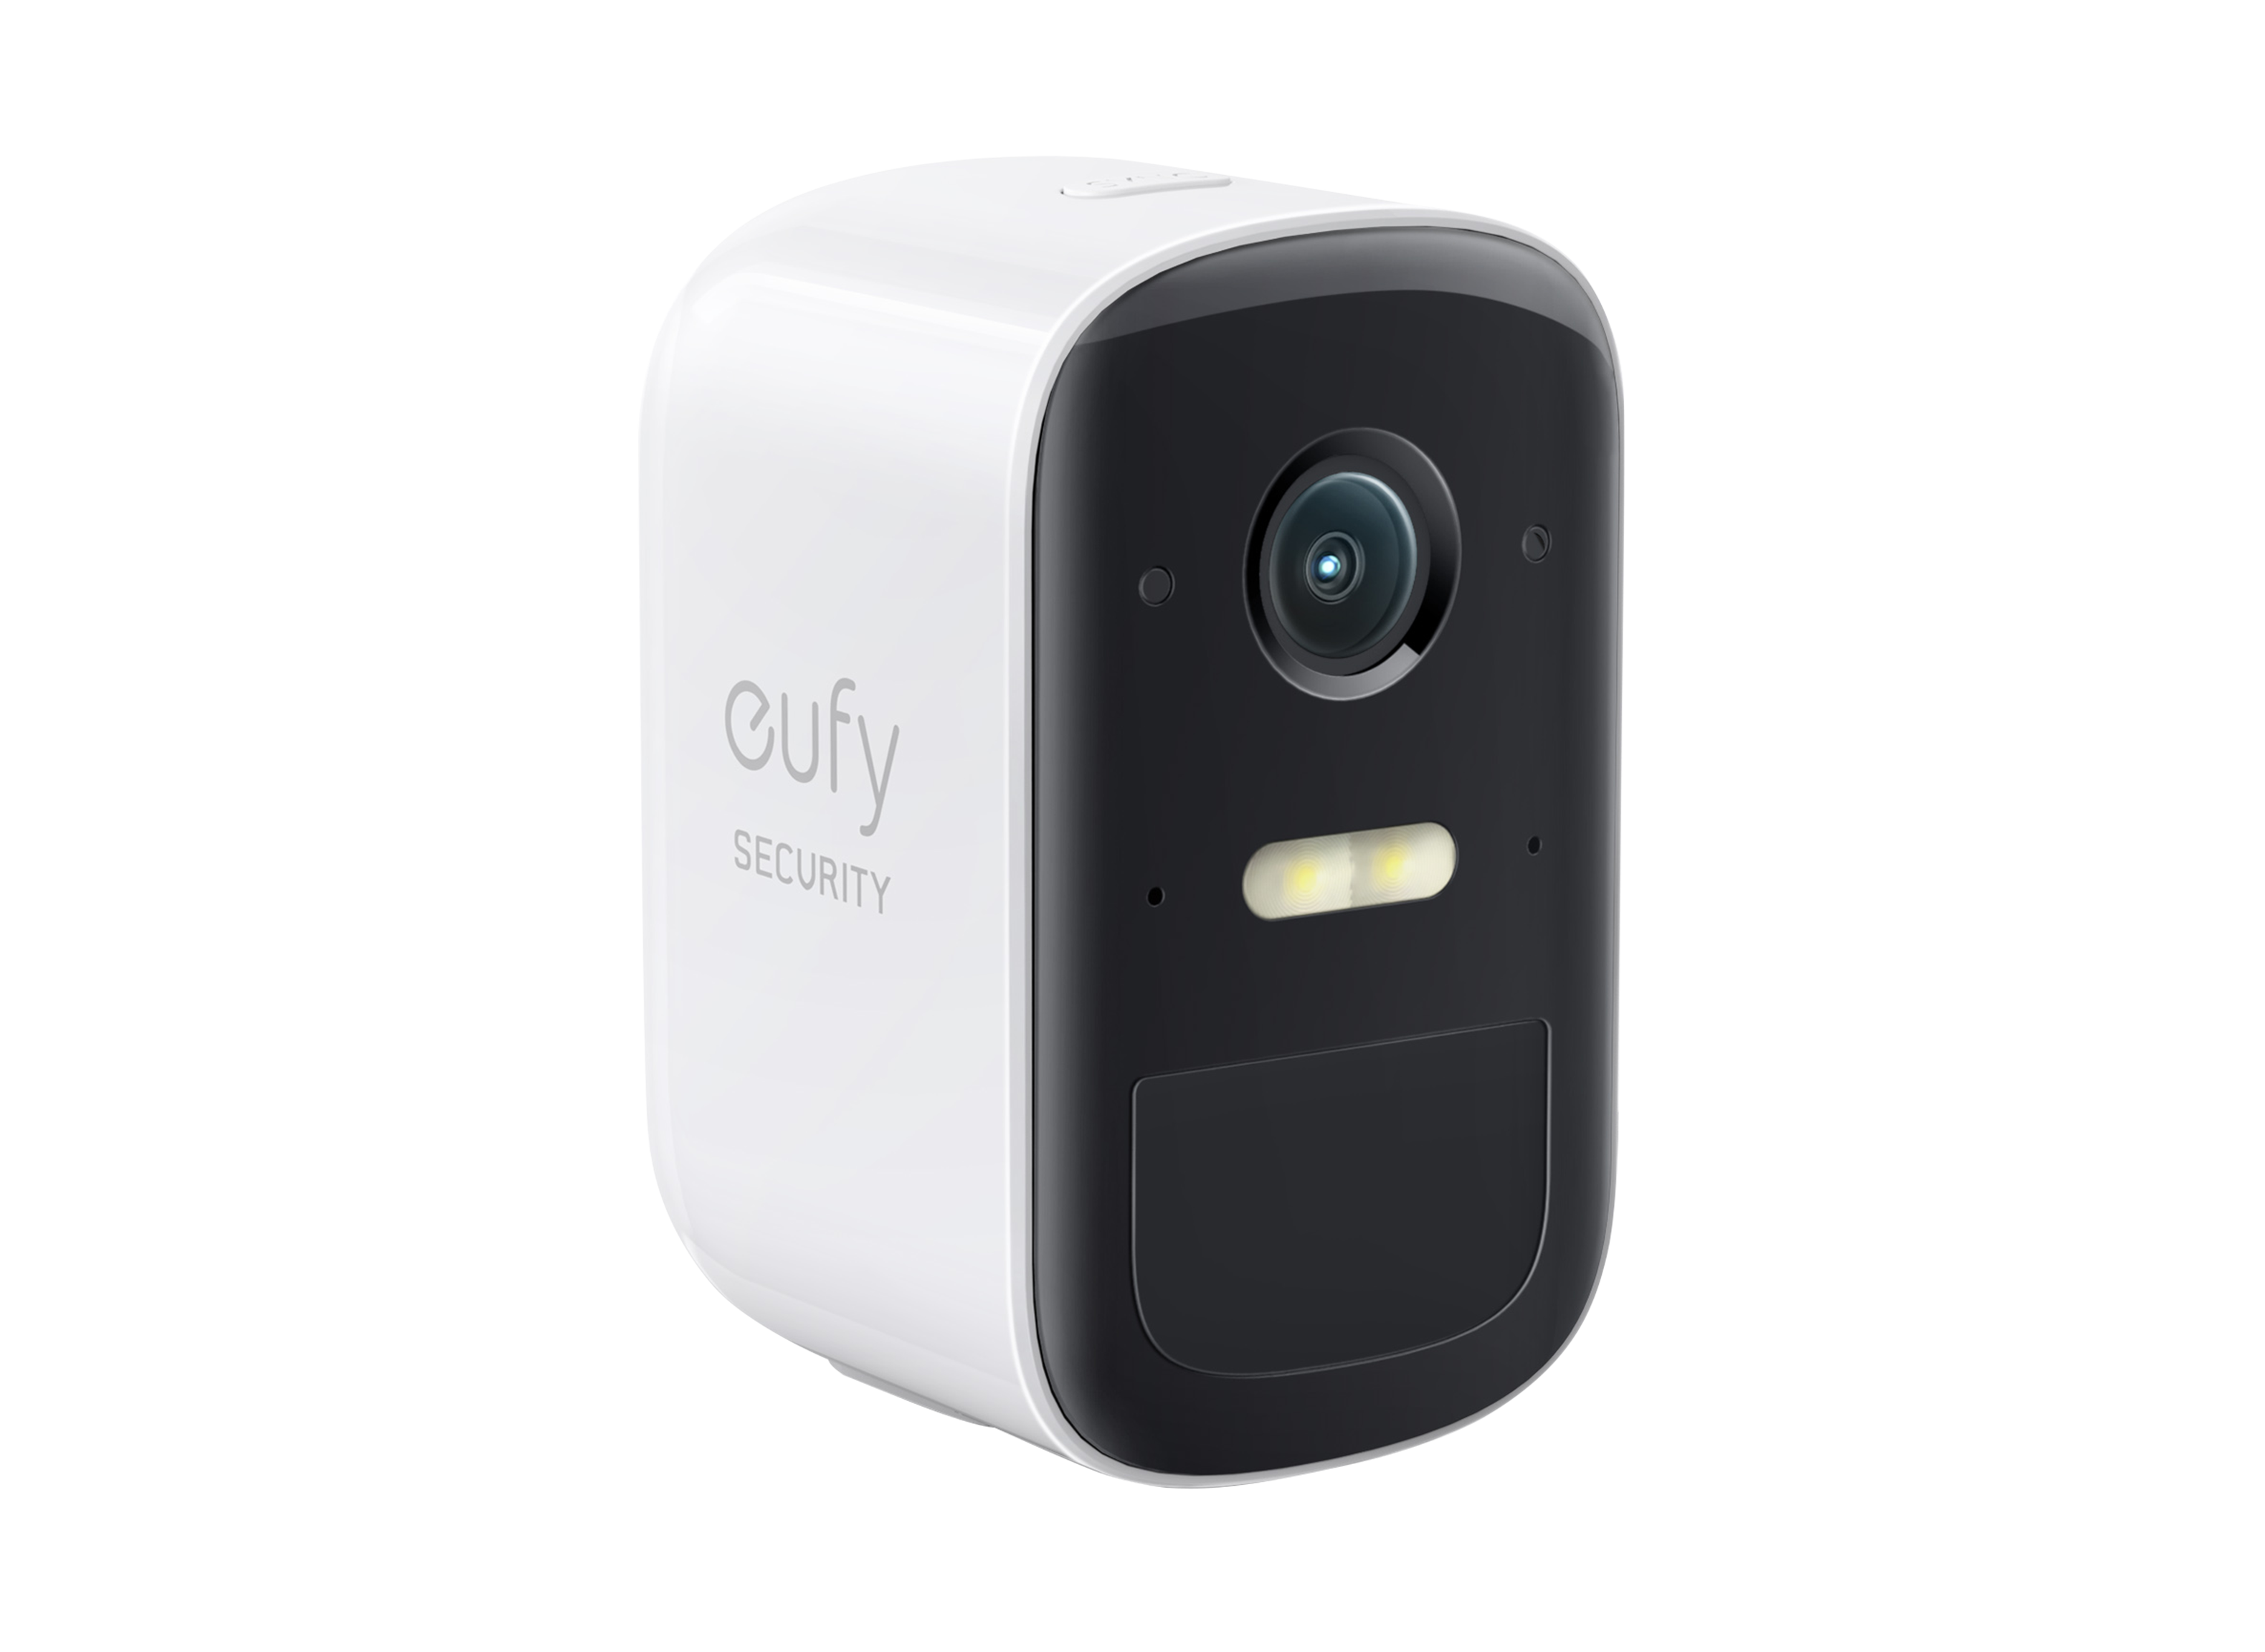 Eufy Cam 2C T8830 (1 Cam Kit) Home Security Camera Review - Consumer Reports